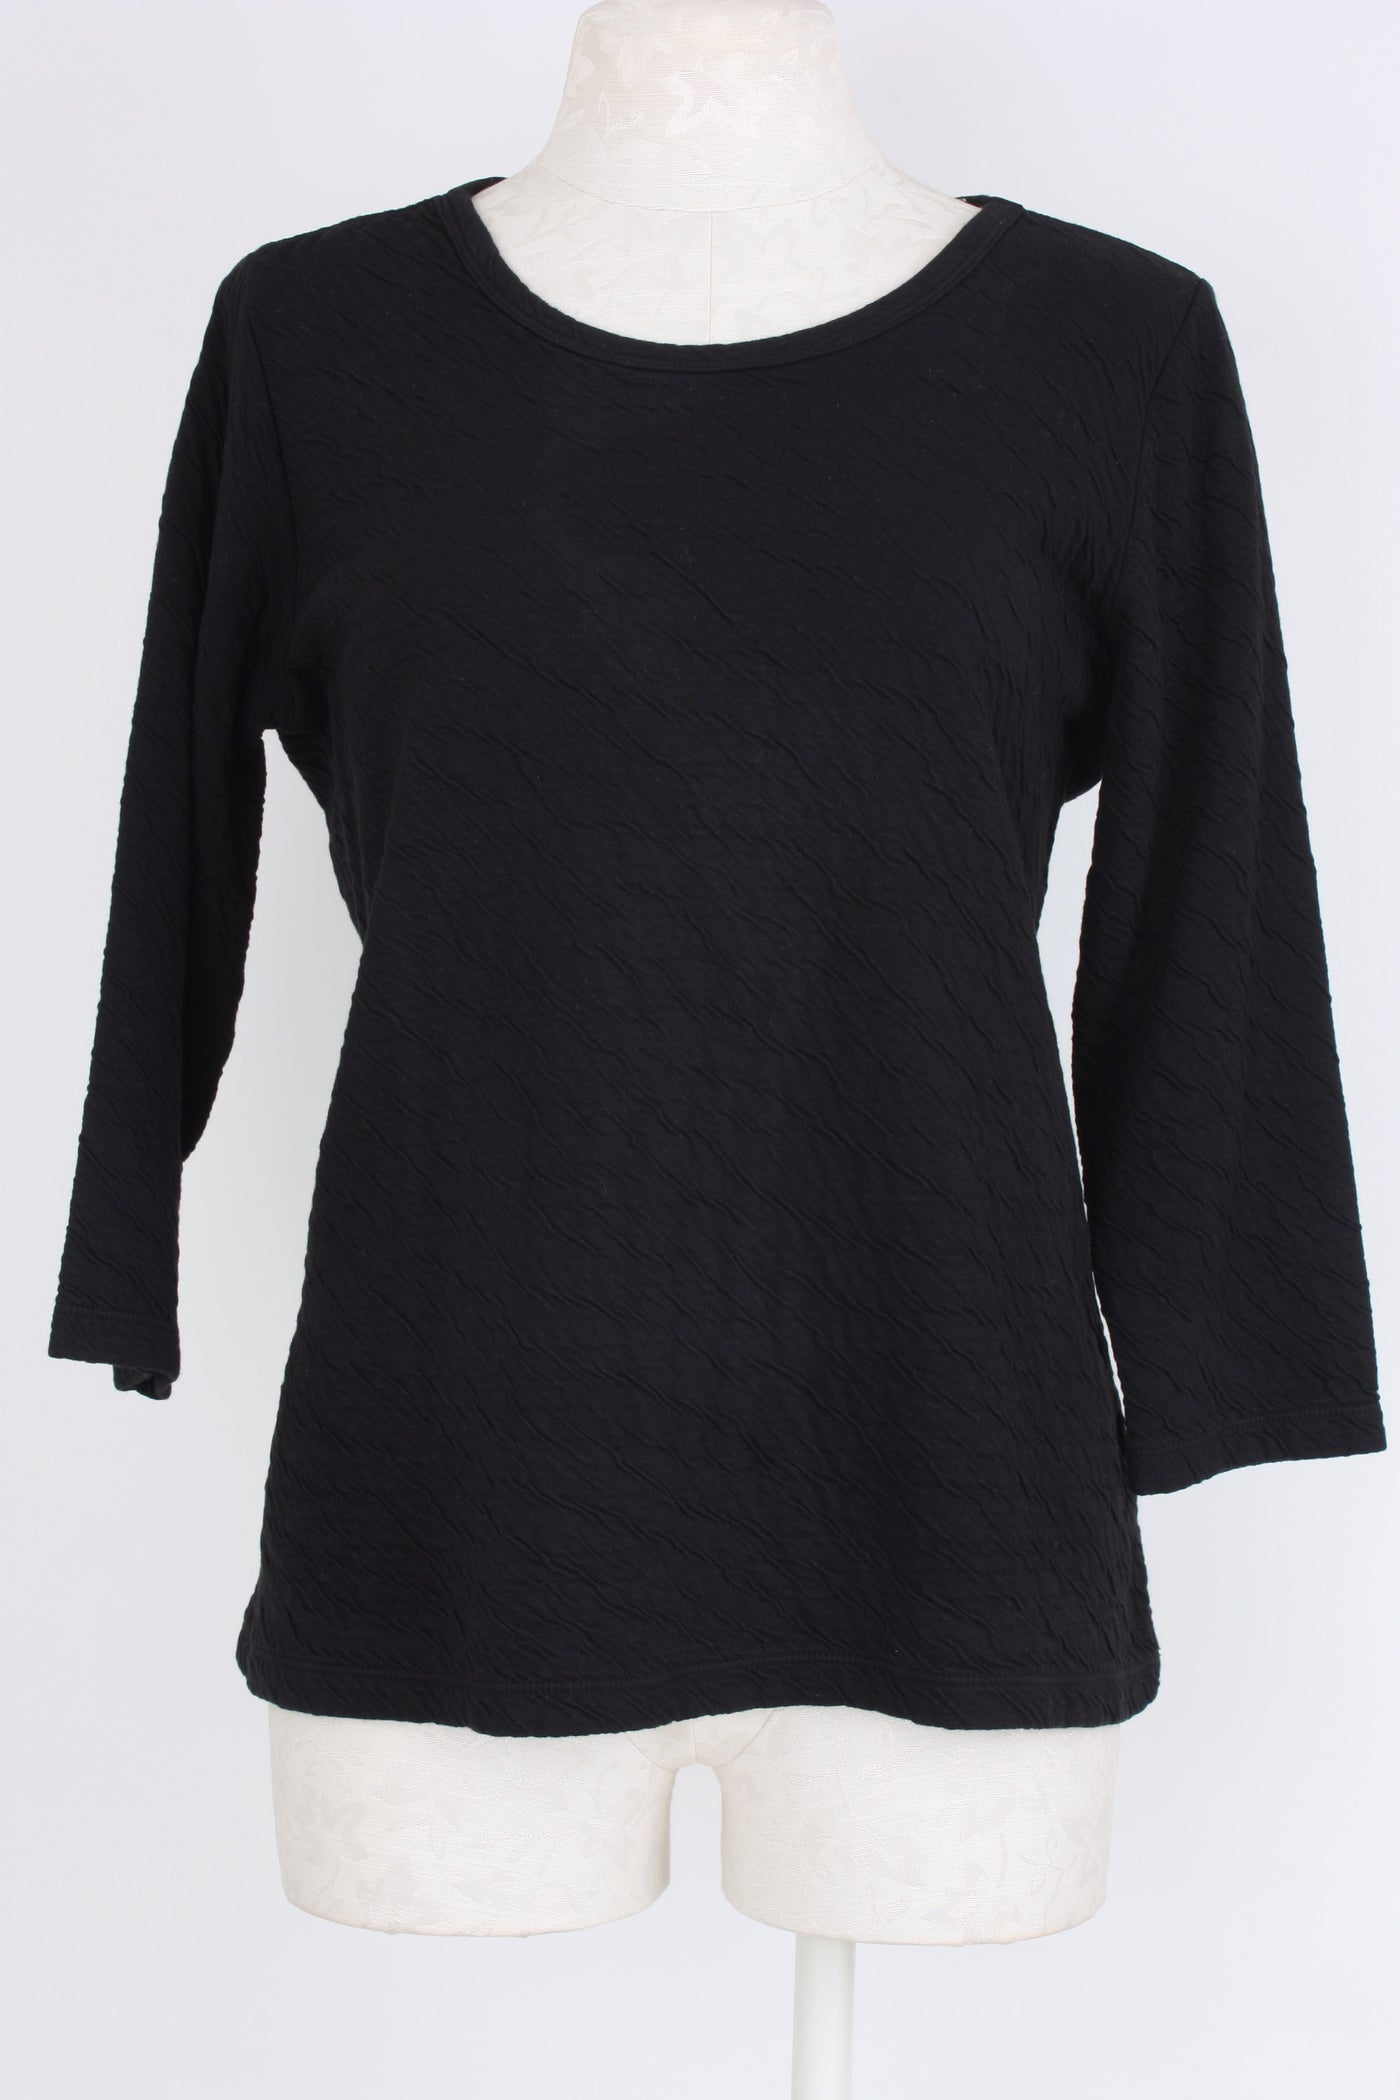 Quilted 3/4 sleeve top in black, Village Vogue